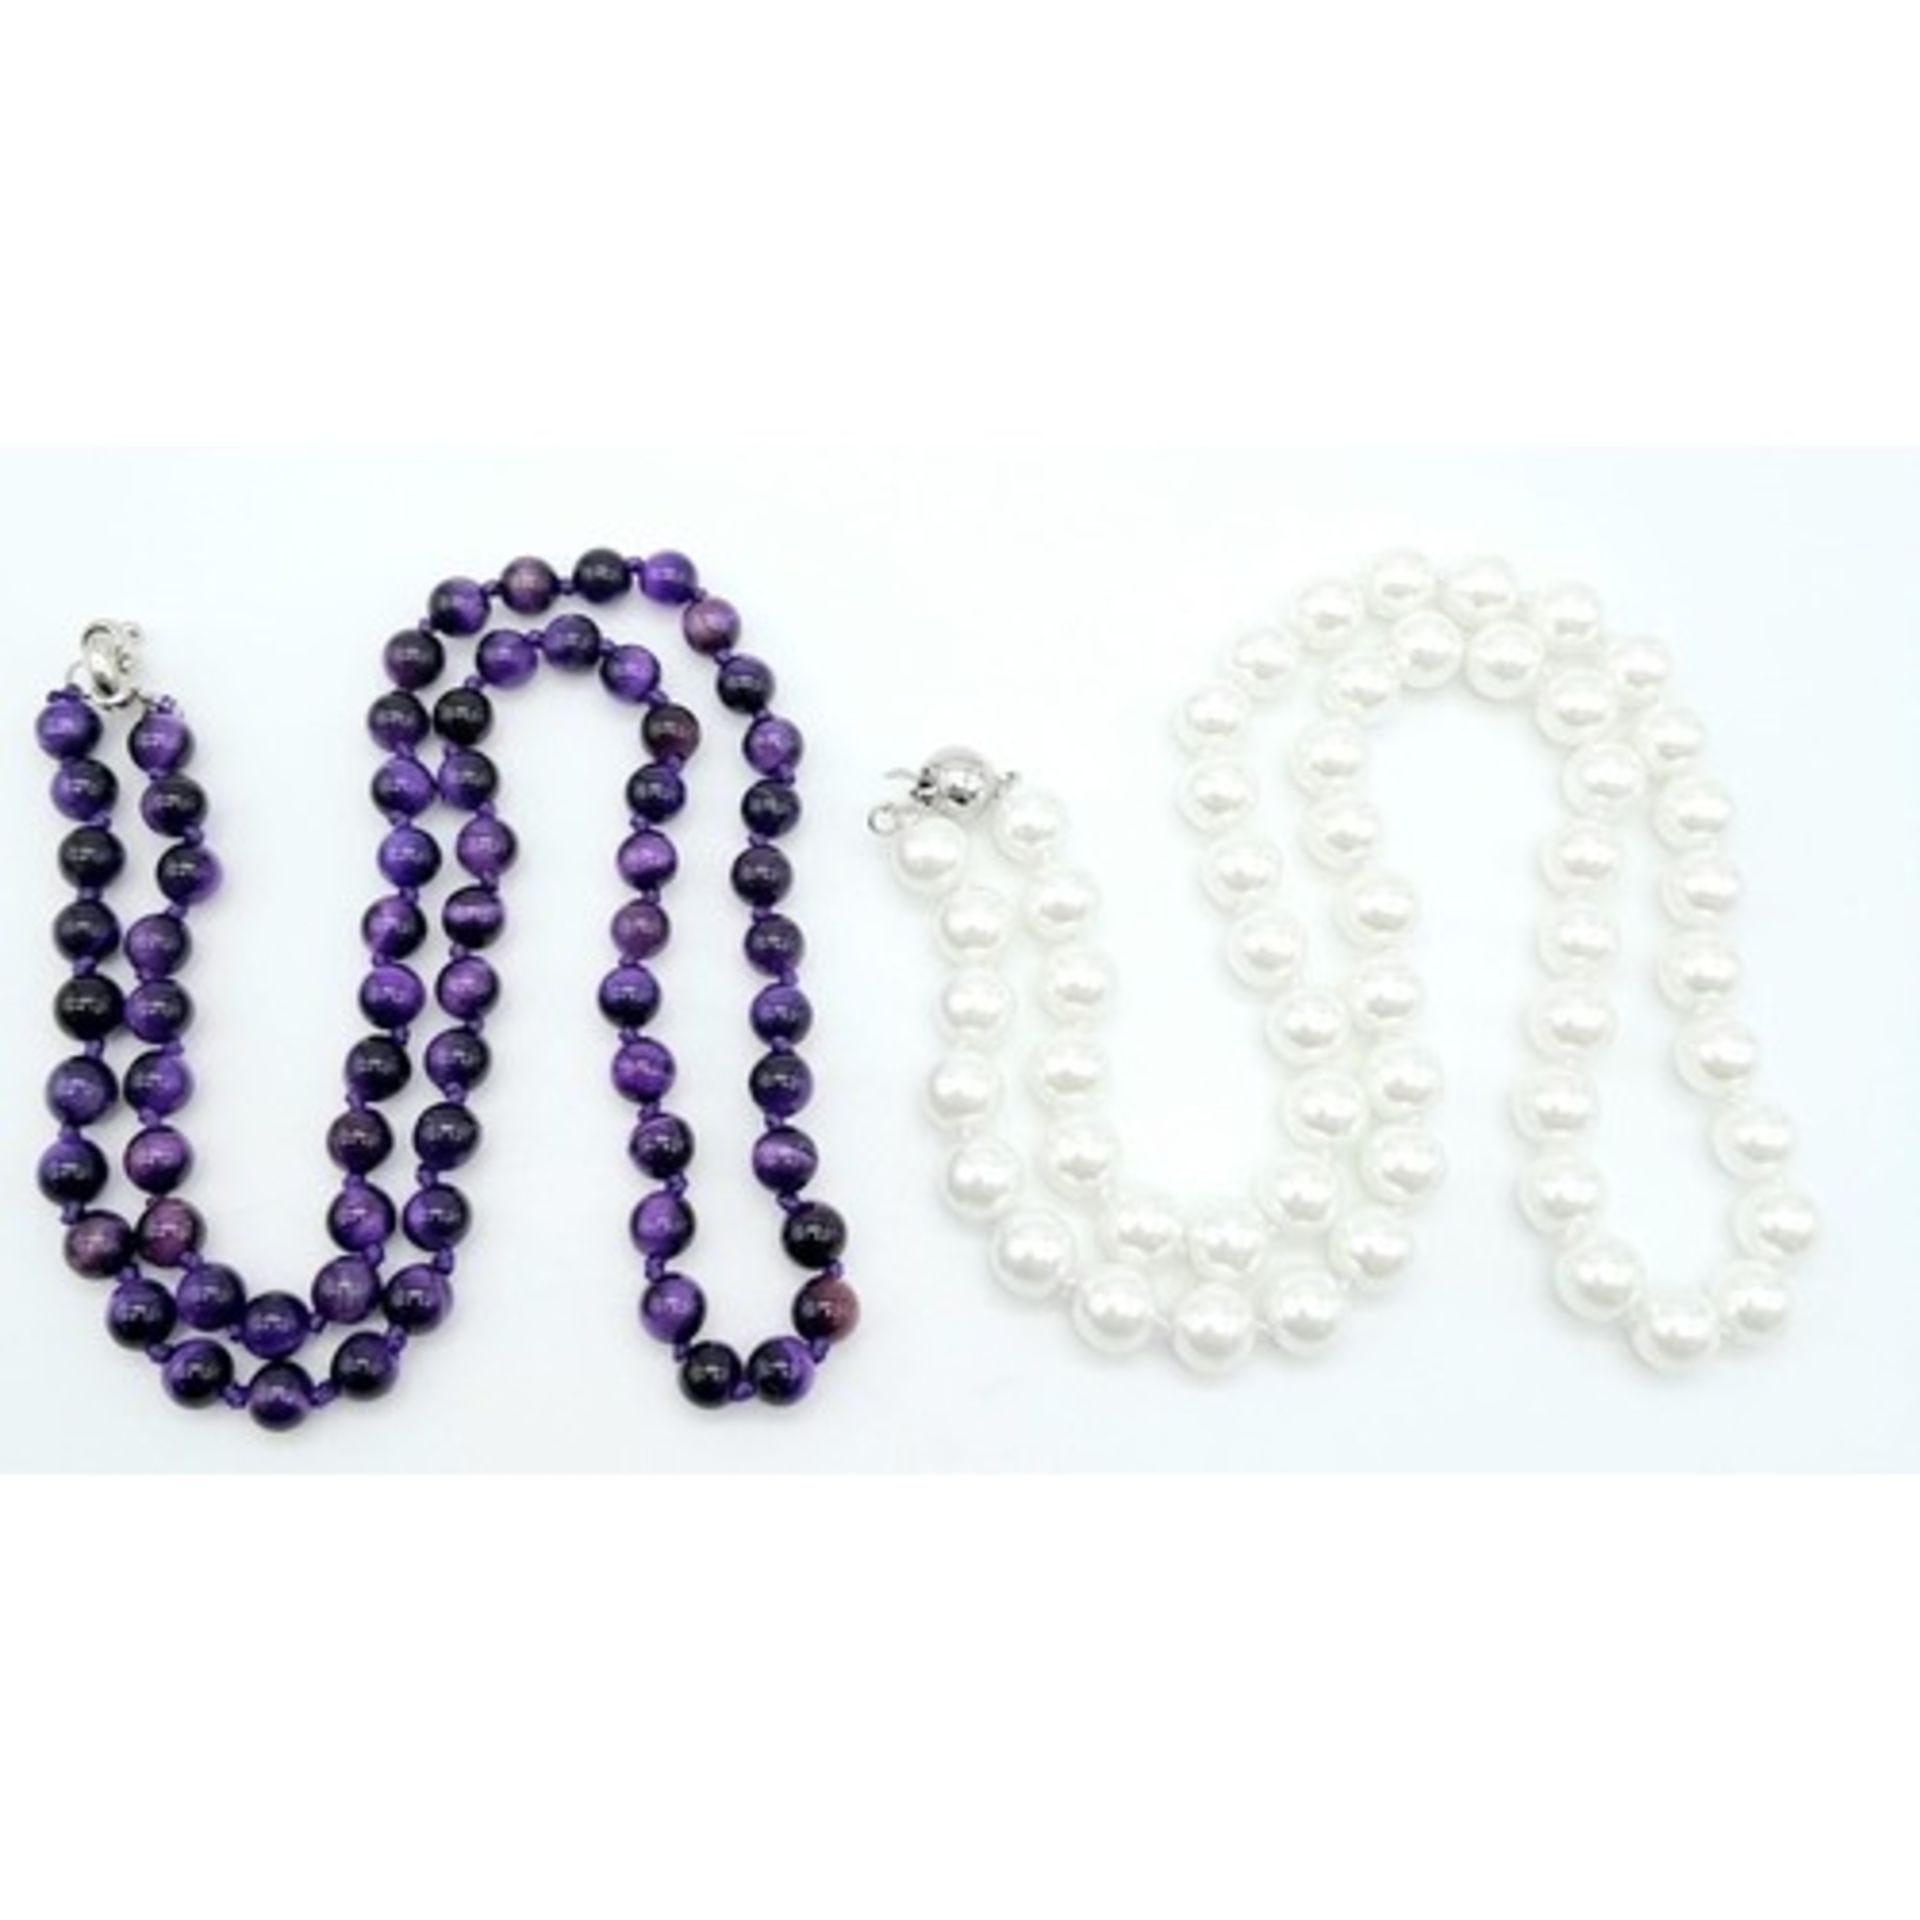 Duo of Beaded Stone Necklaces. One Pearlescent White (48cm) and one Iridescent Black/Purple Stone ( - Bild 3 aus 3